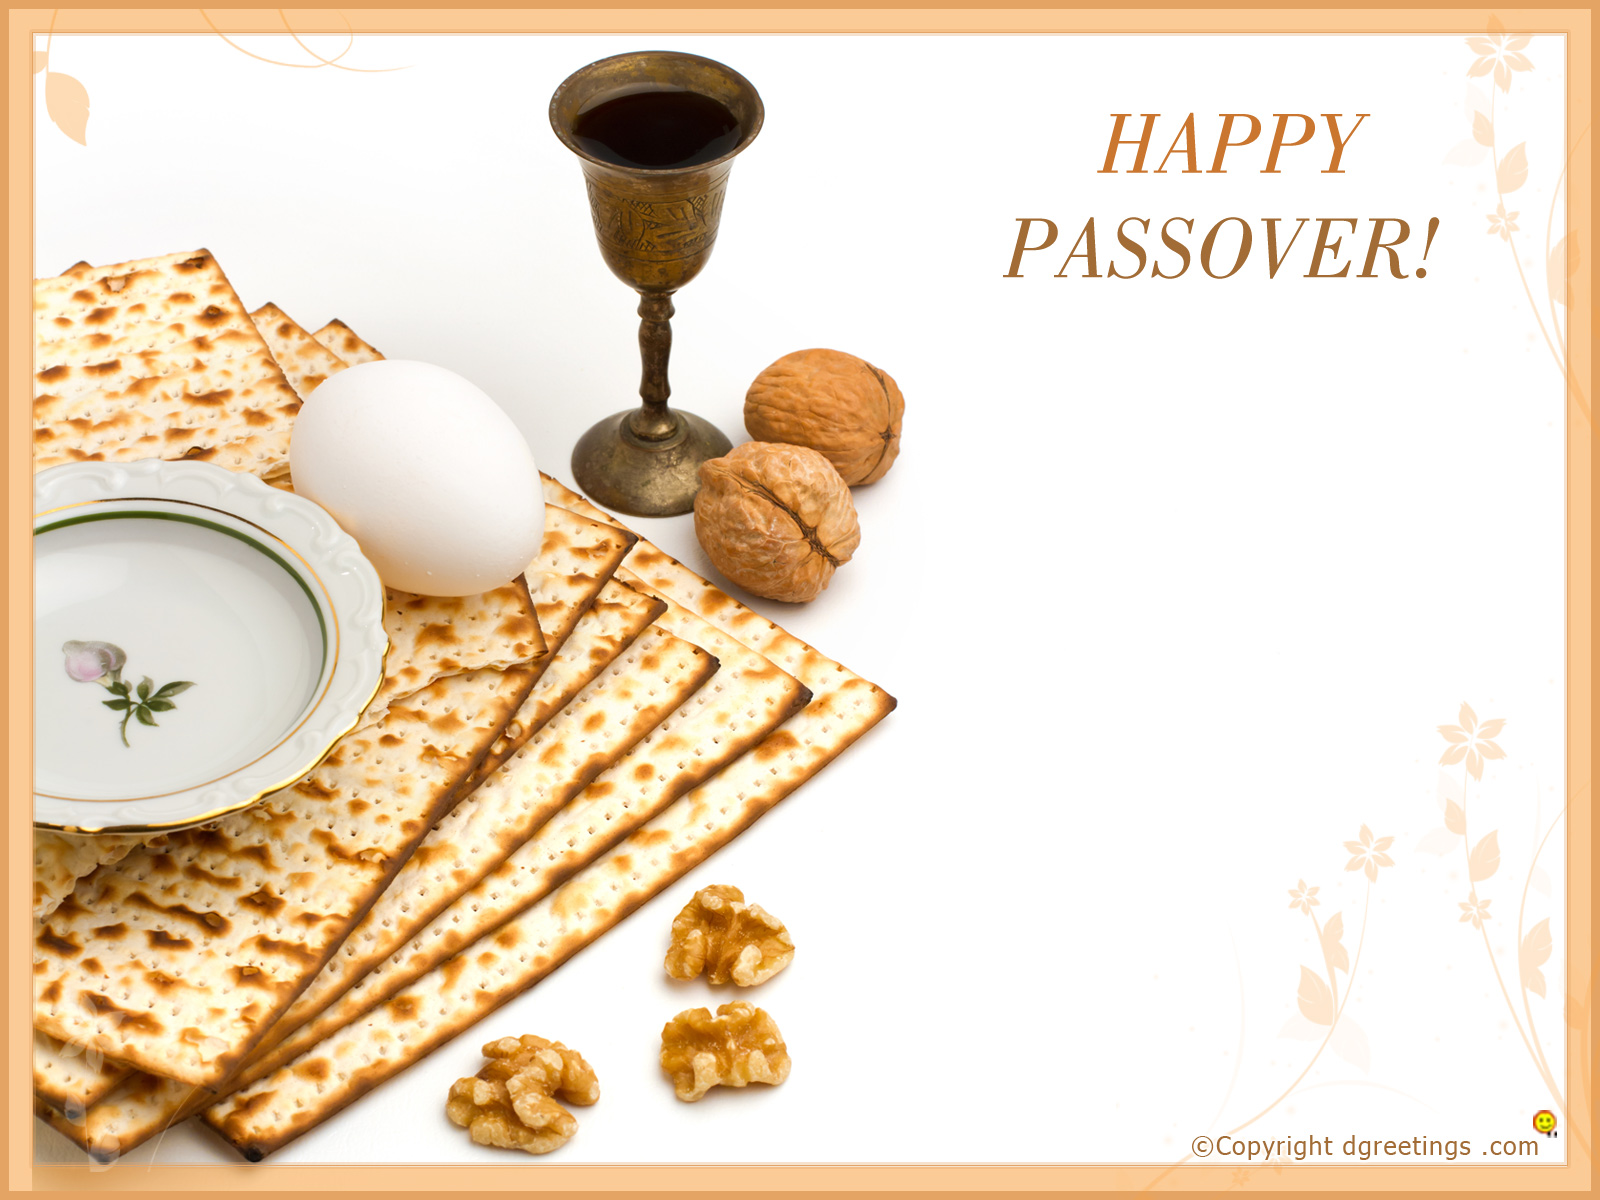 Passover wallpapers of different sizes Free Wallpapers Computer